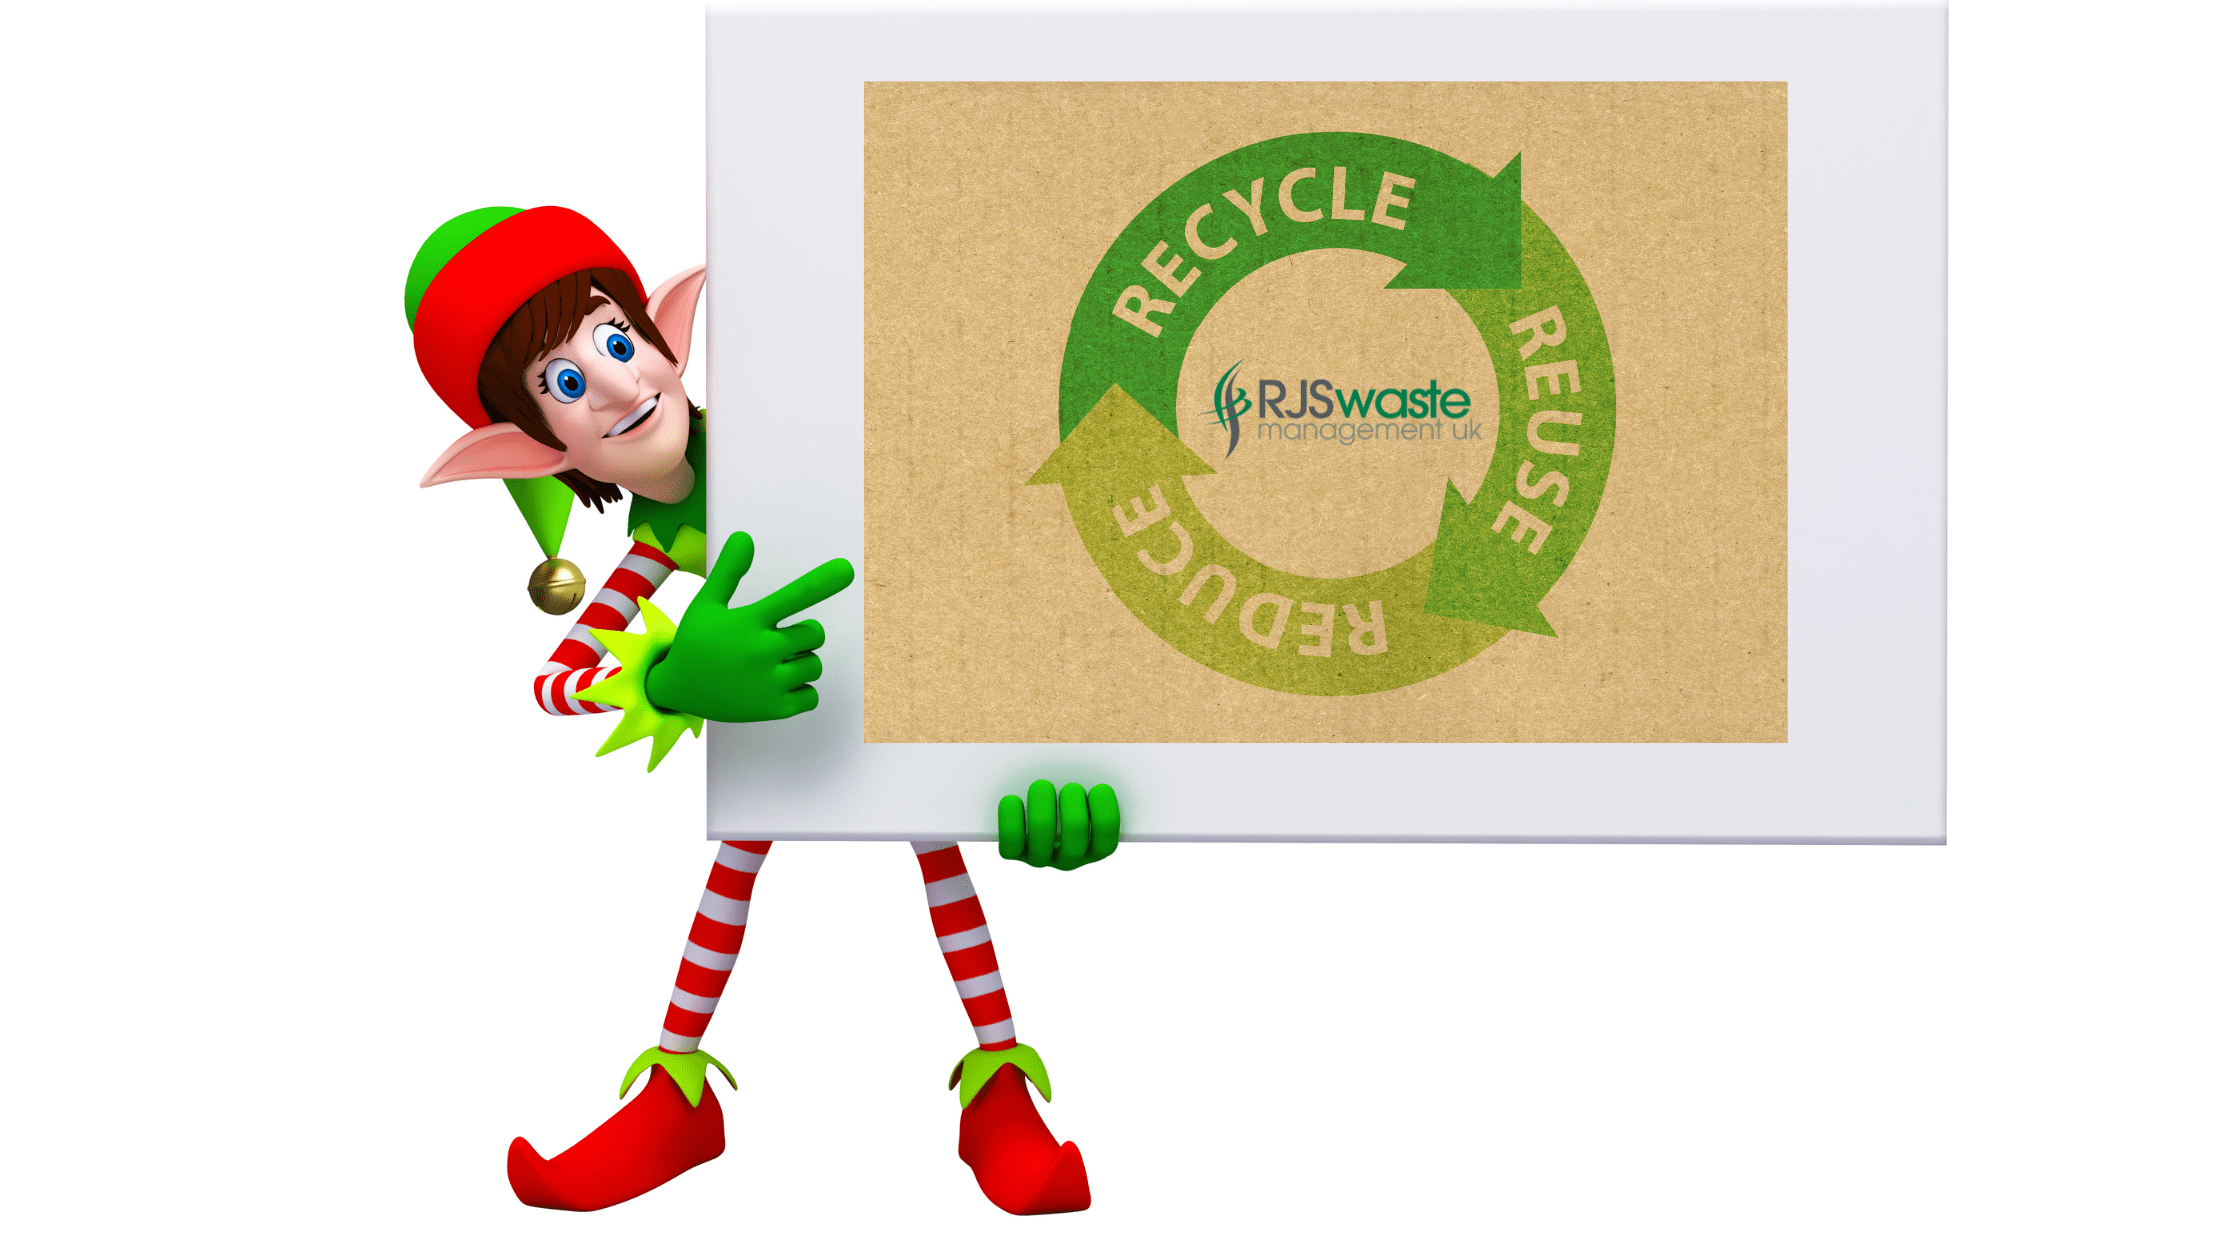 Christmas elf dressed in red and green, holding a business card that says the words Recycle, Reuse, Reduce and features the RJS Waste Management logo